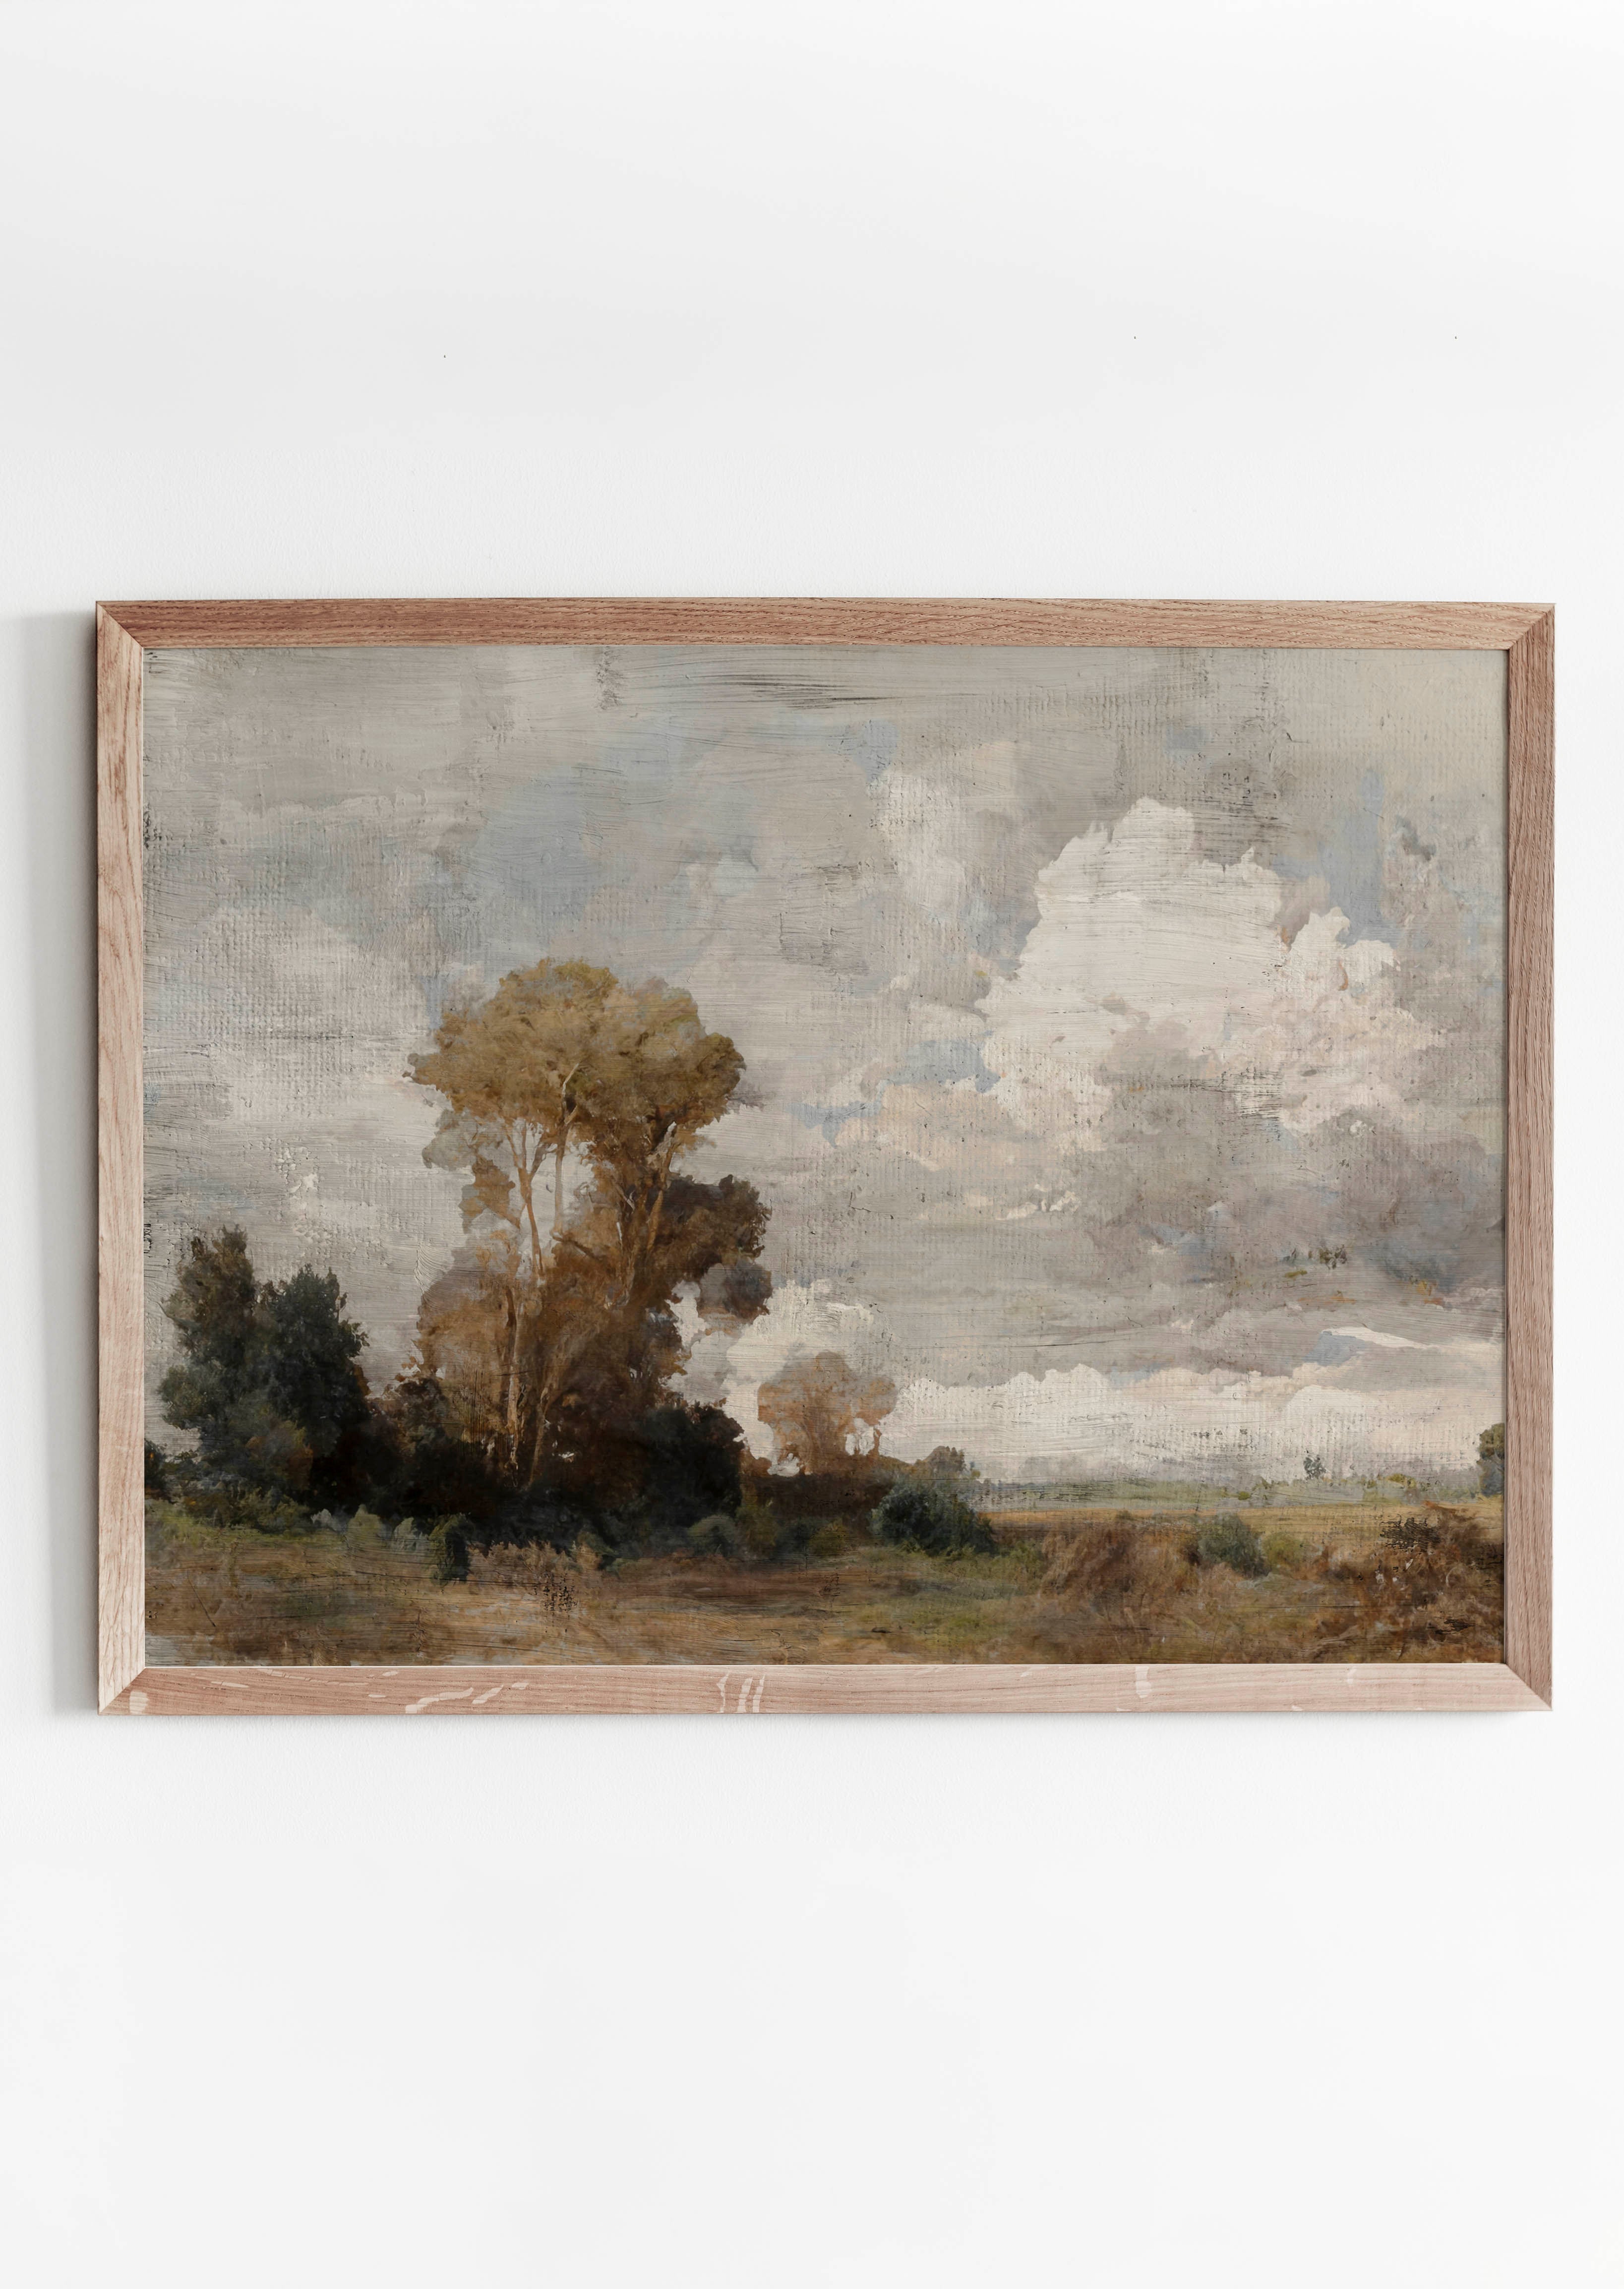 Vintage painting of fall scenery countryside landscape